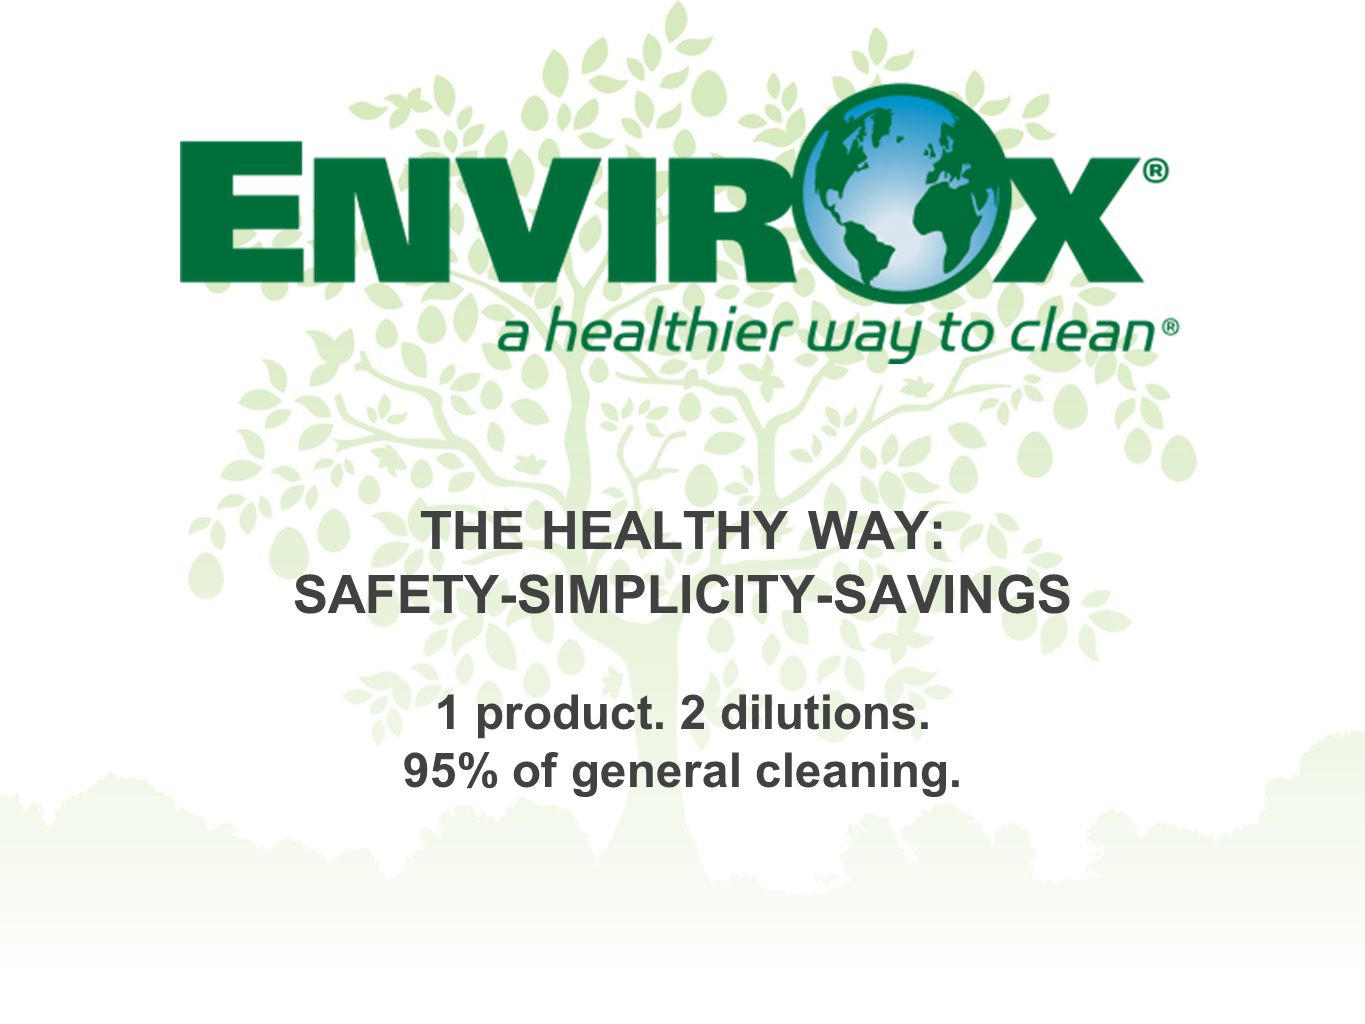 THE HEALTHY WAY: SAFETY-SIMPLICITY-SAVINGS 1 product. 2 dilutions. 95% of general cleaning.